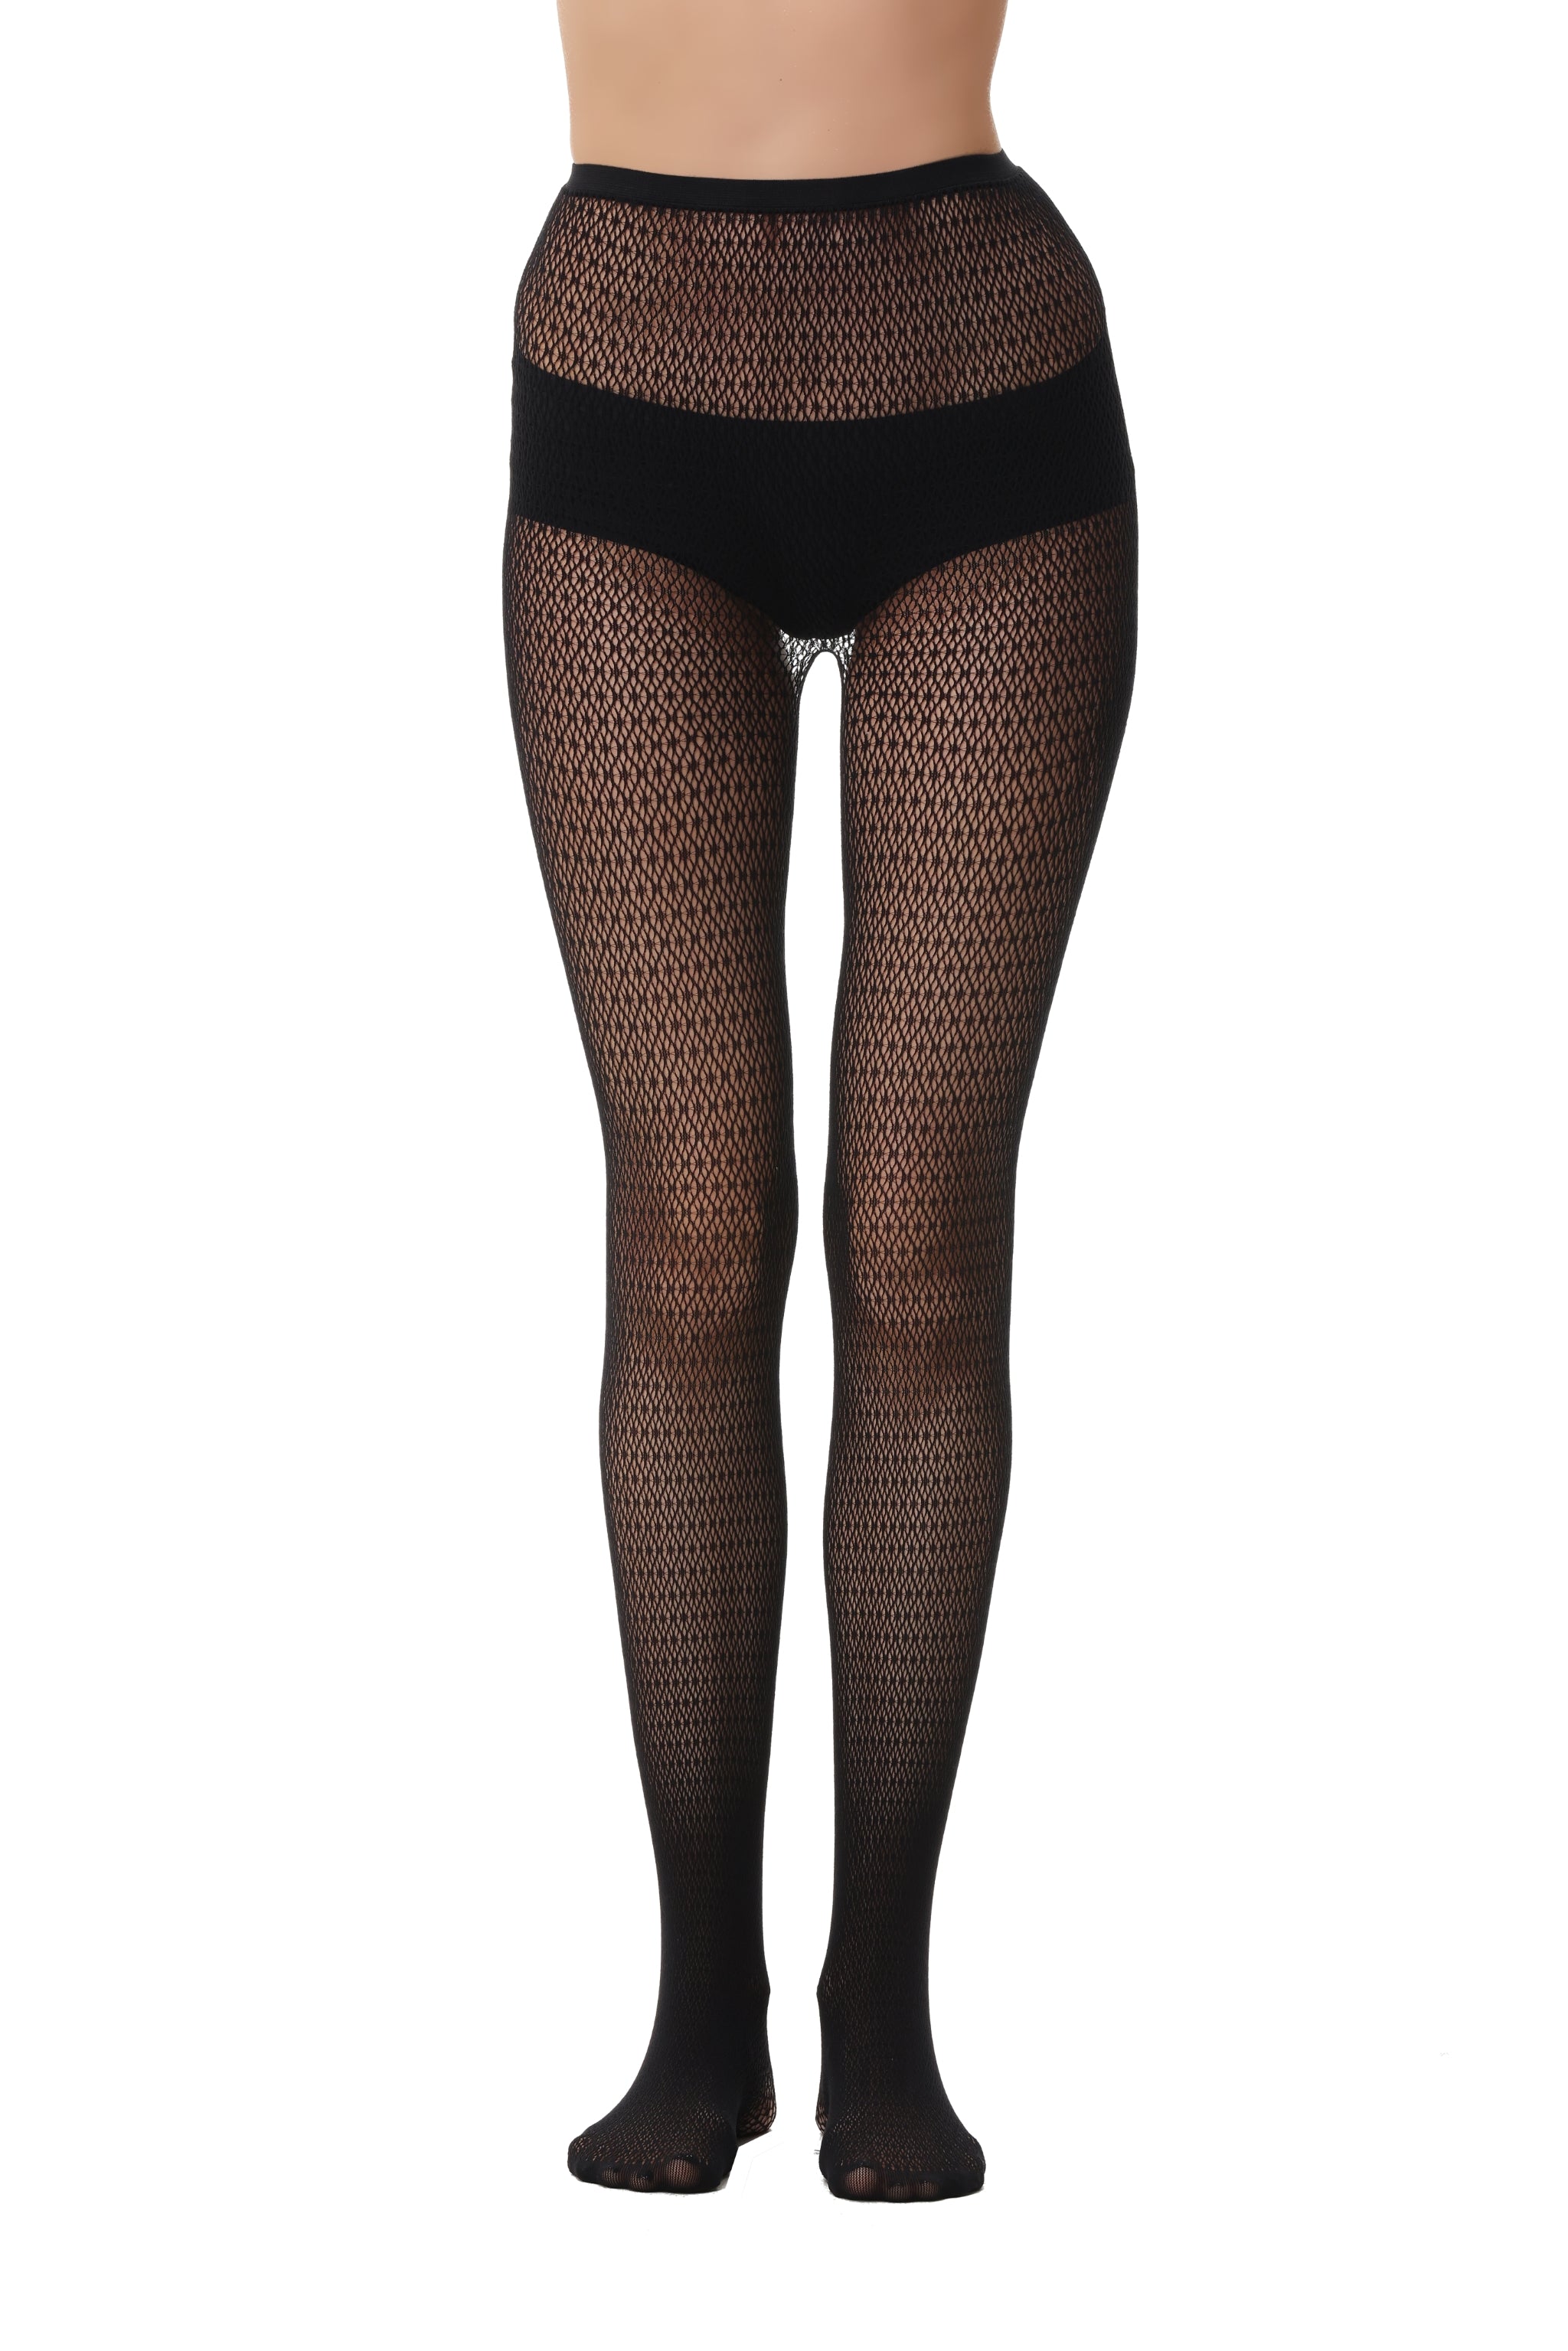 Fishnet Tights 110967-2 Front